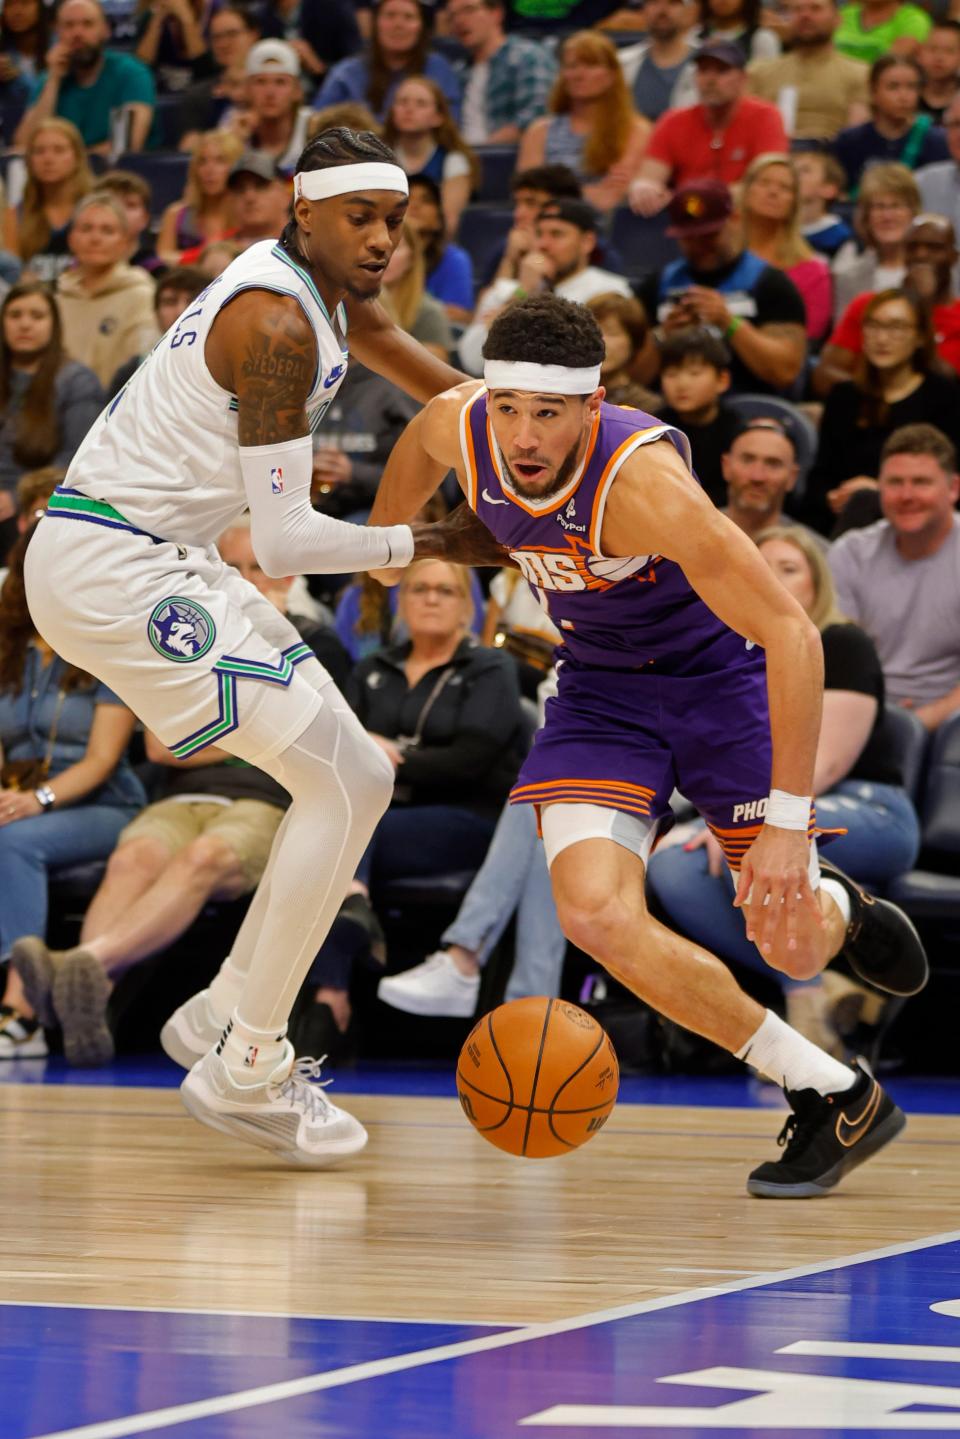 Will Devin Booker and the Phoenix Suns beat the Minnesota Timberwolves in the NBA Playoffs? First-round picks, predictions and odds weigh in on the series.